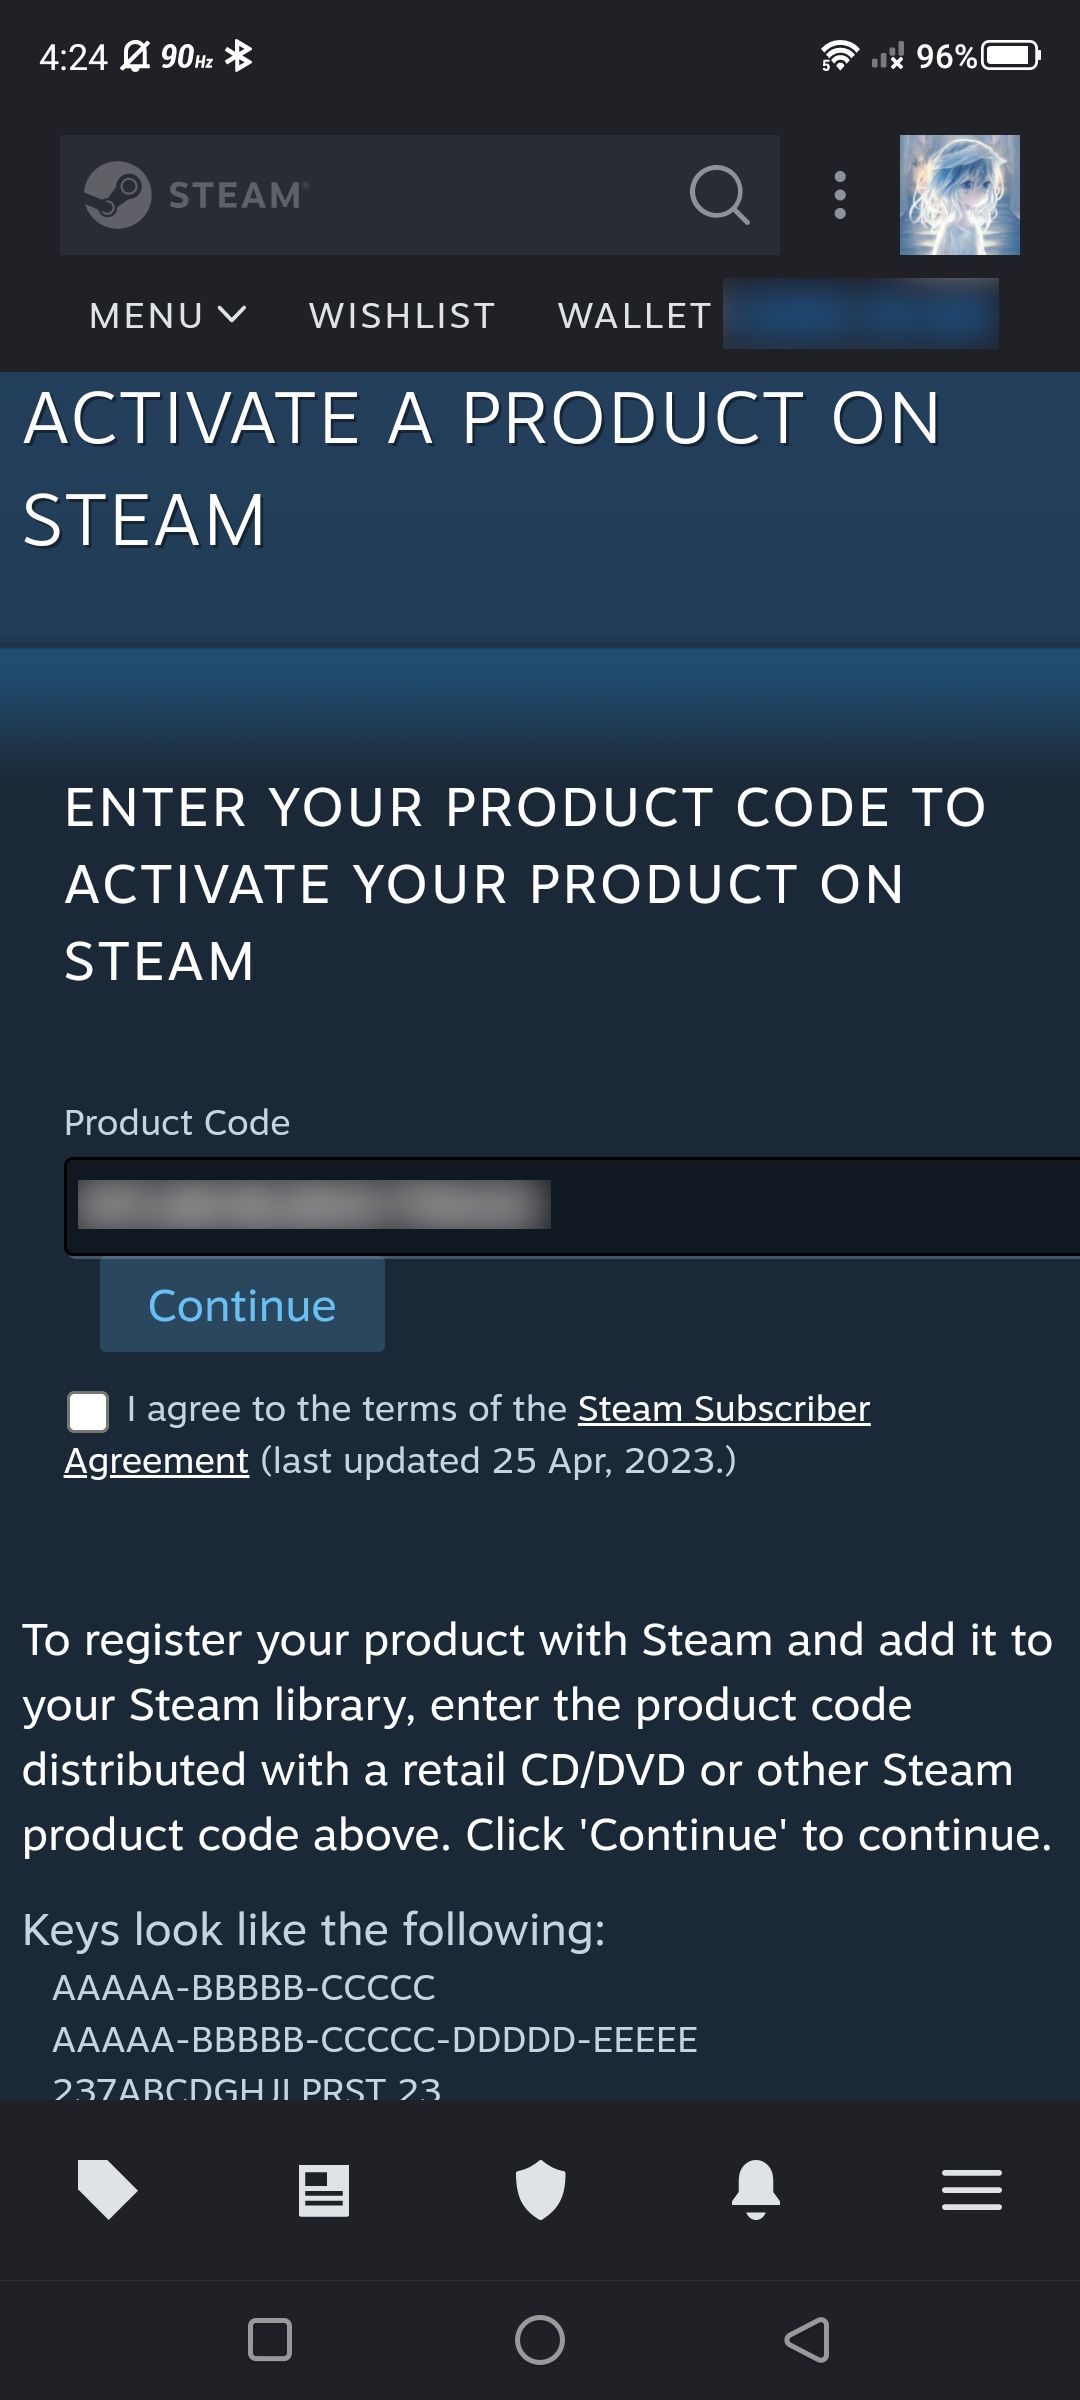 entered product code on activate your product on steam mobile app